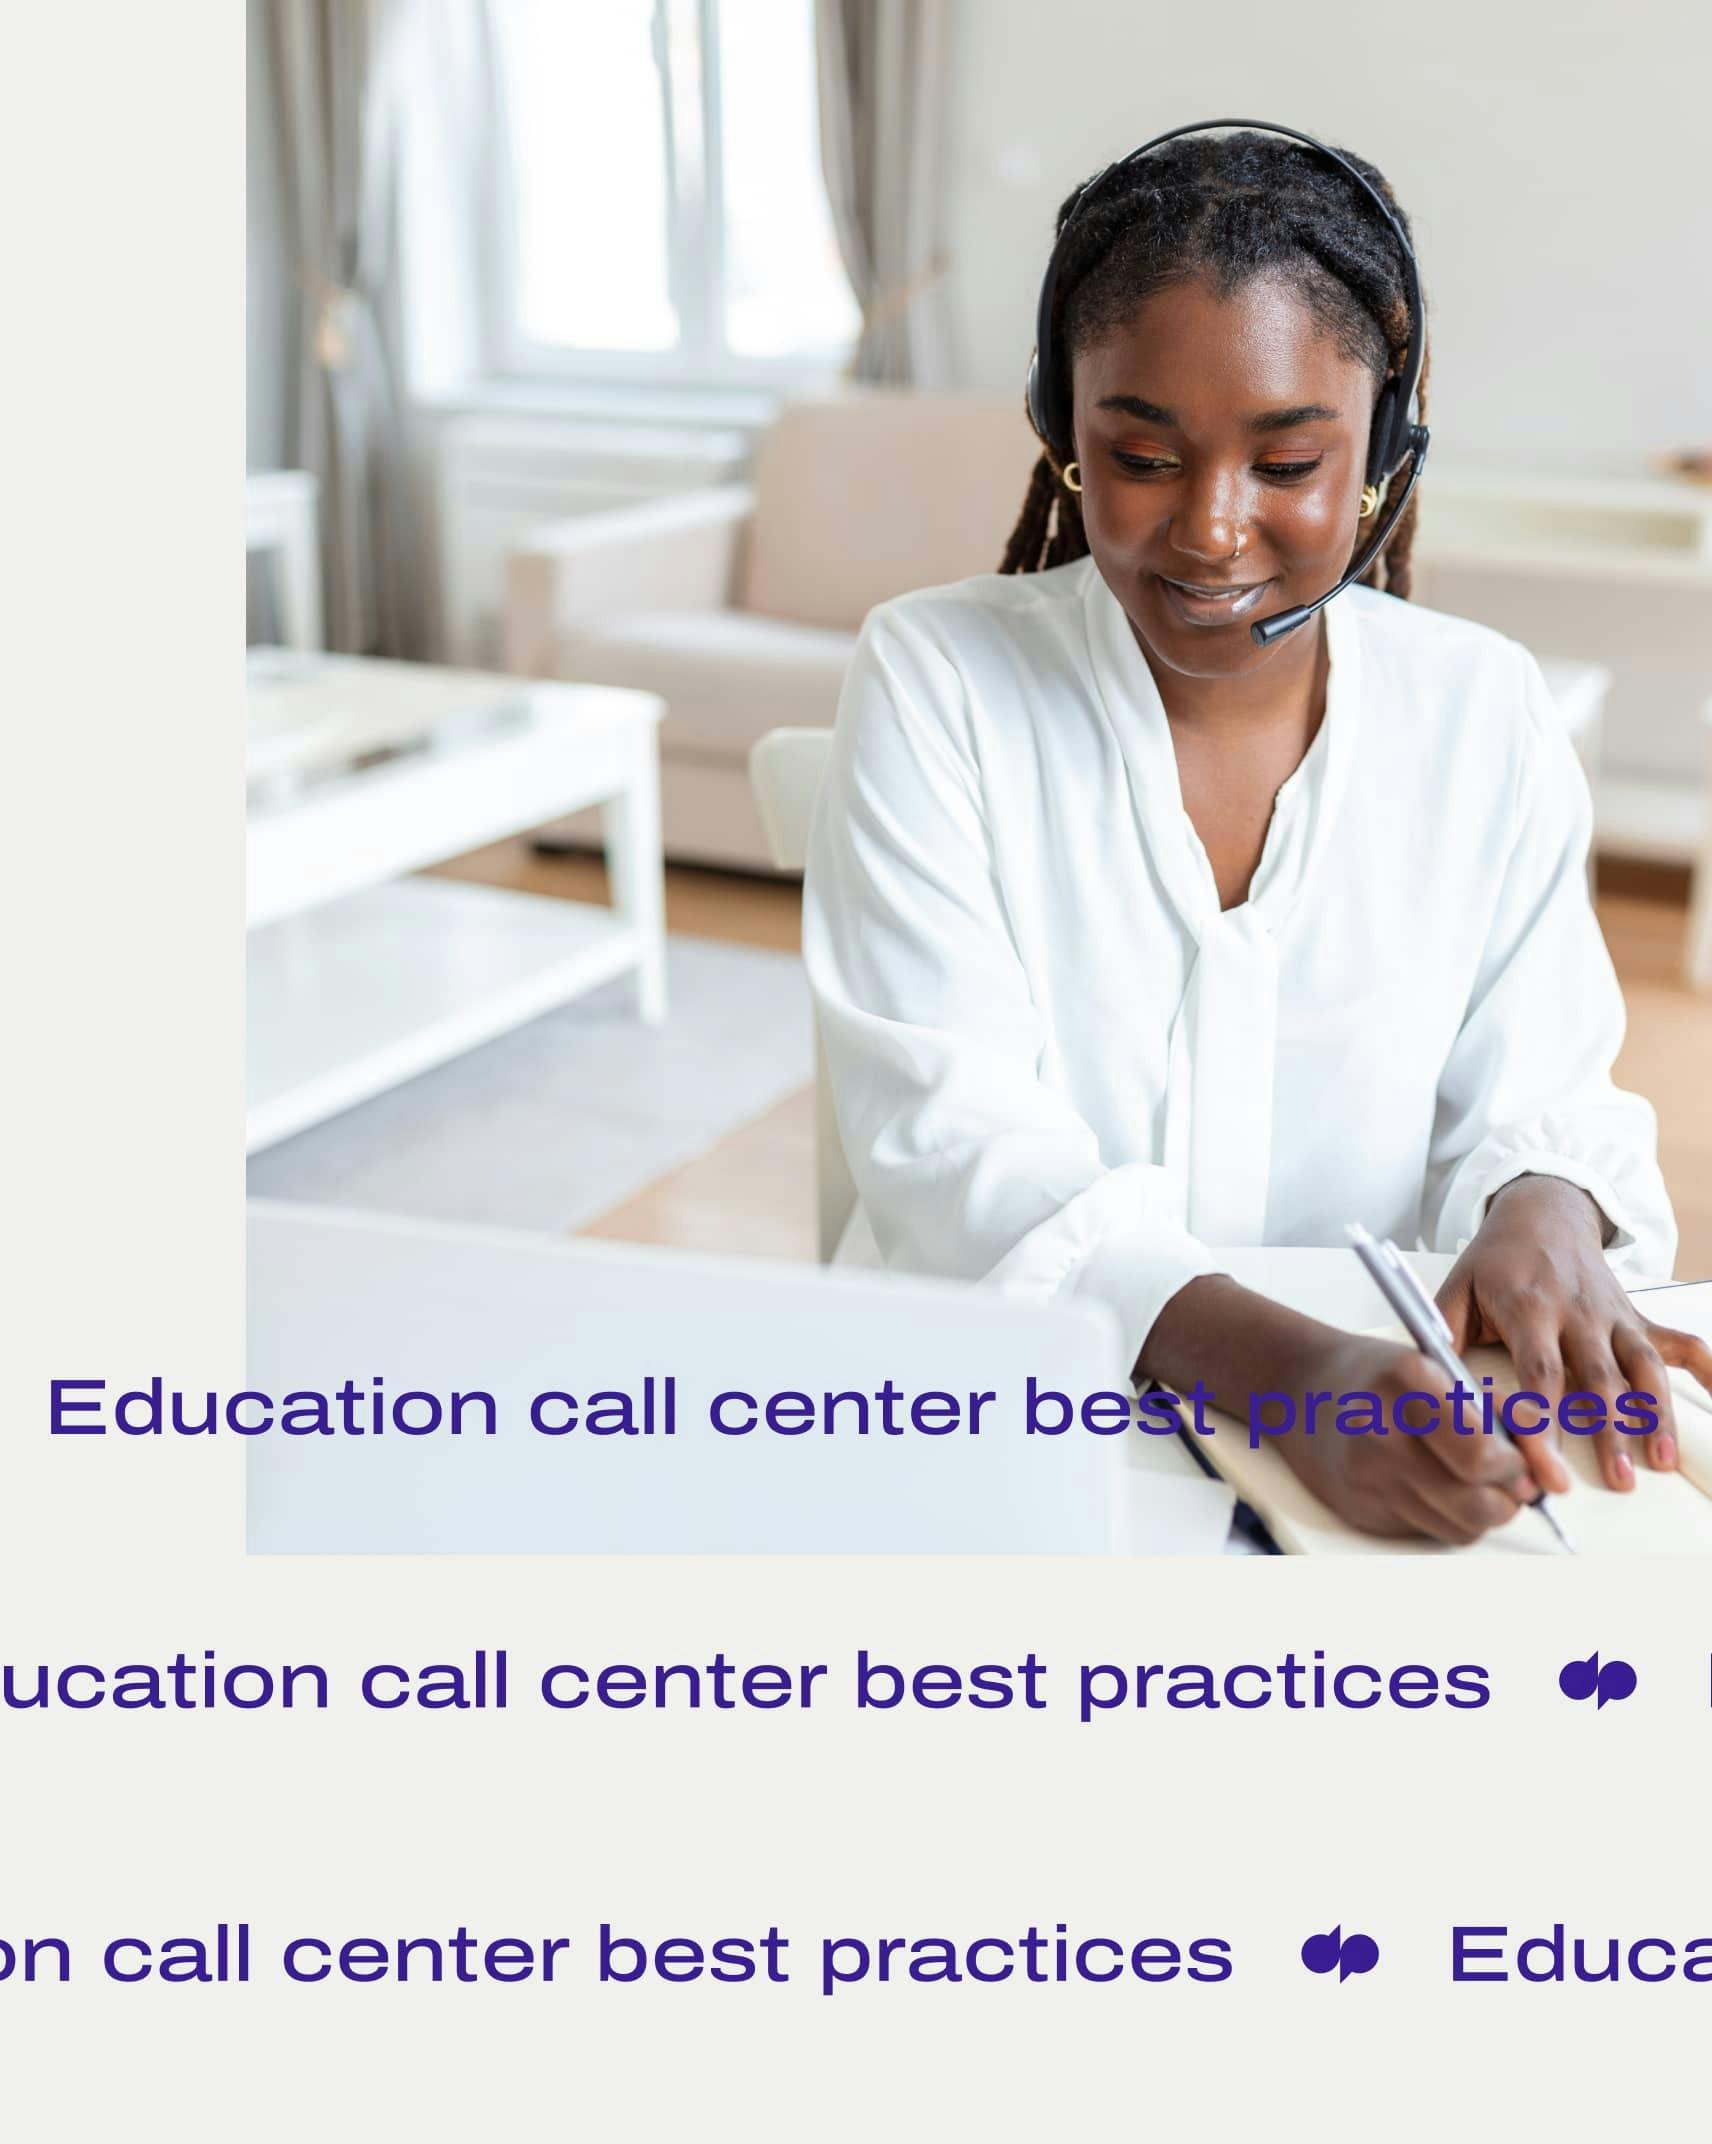 Education call center best practices